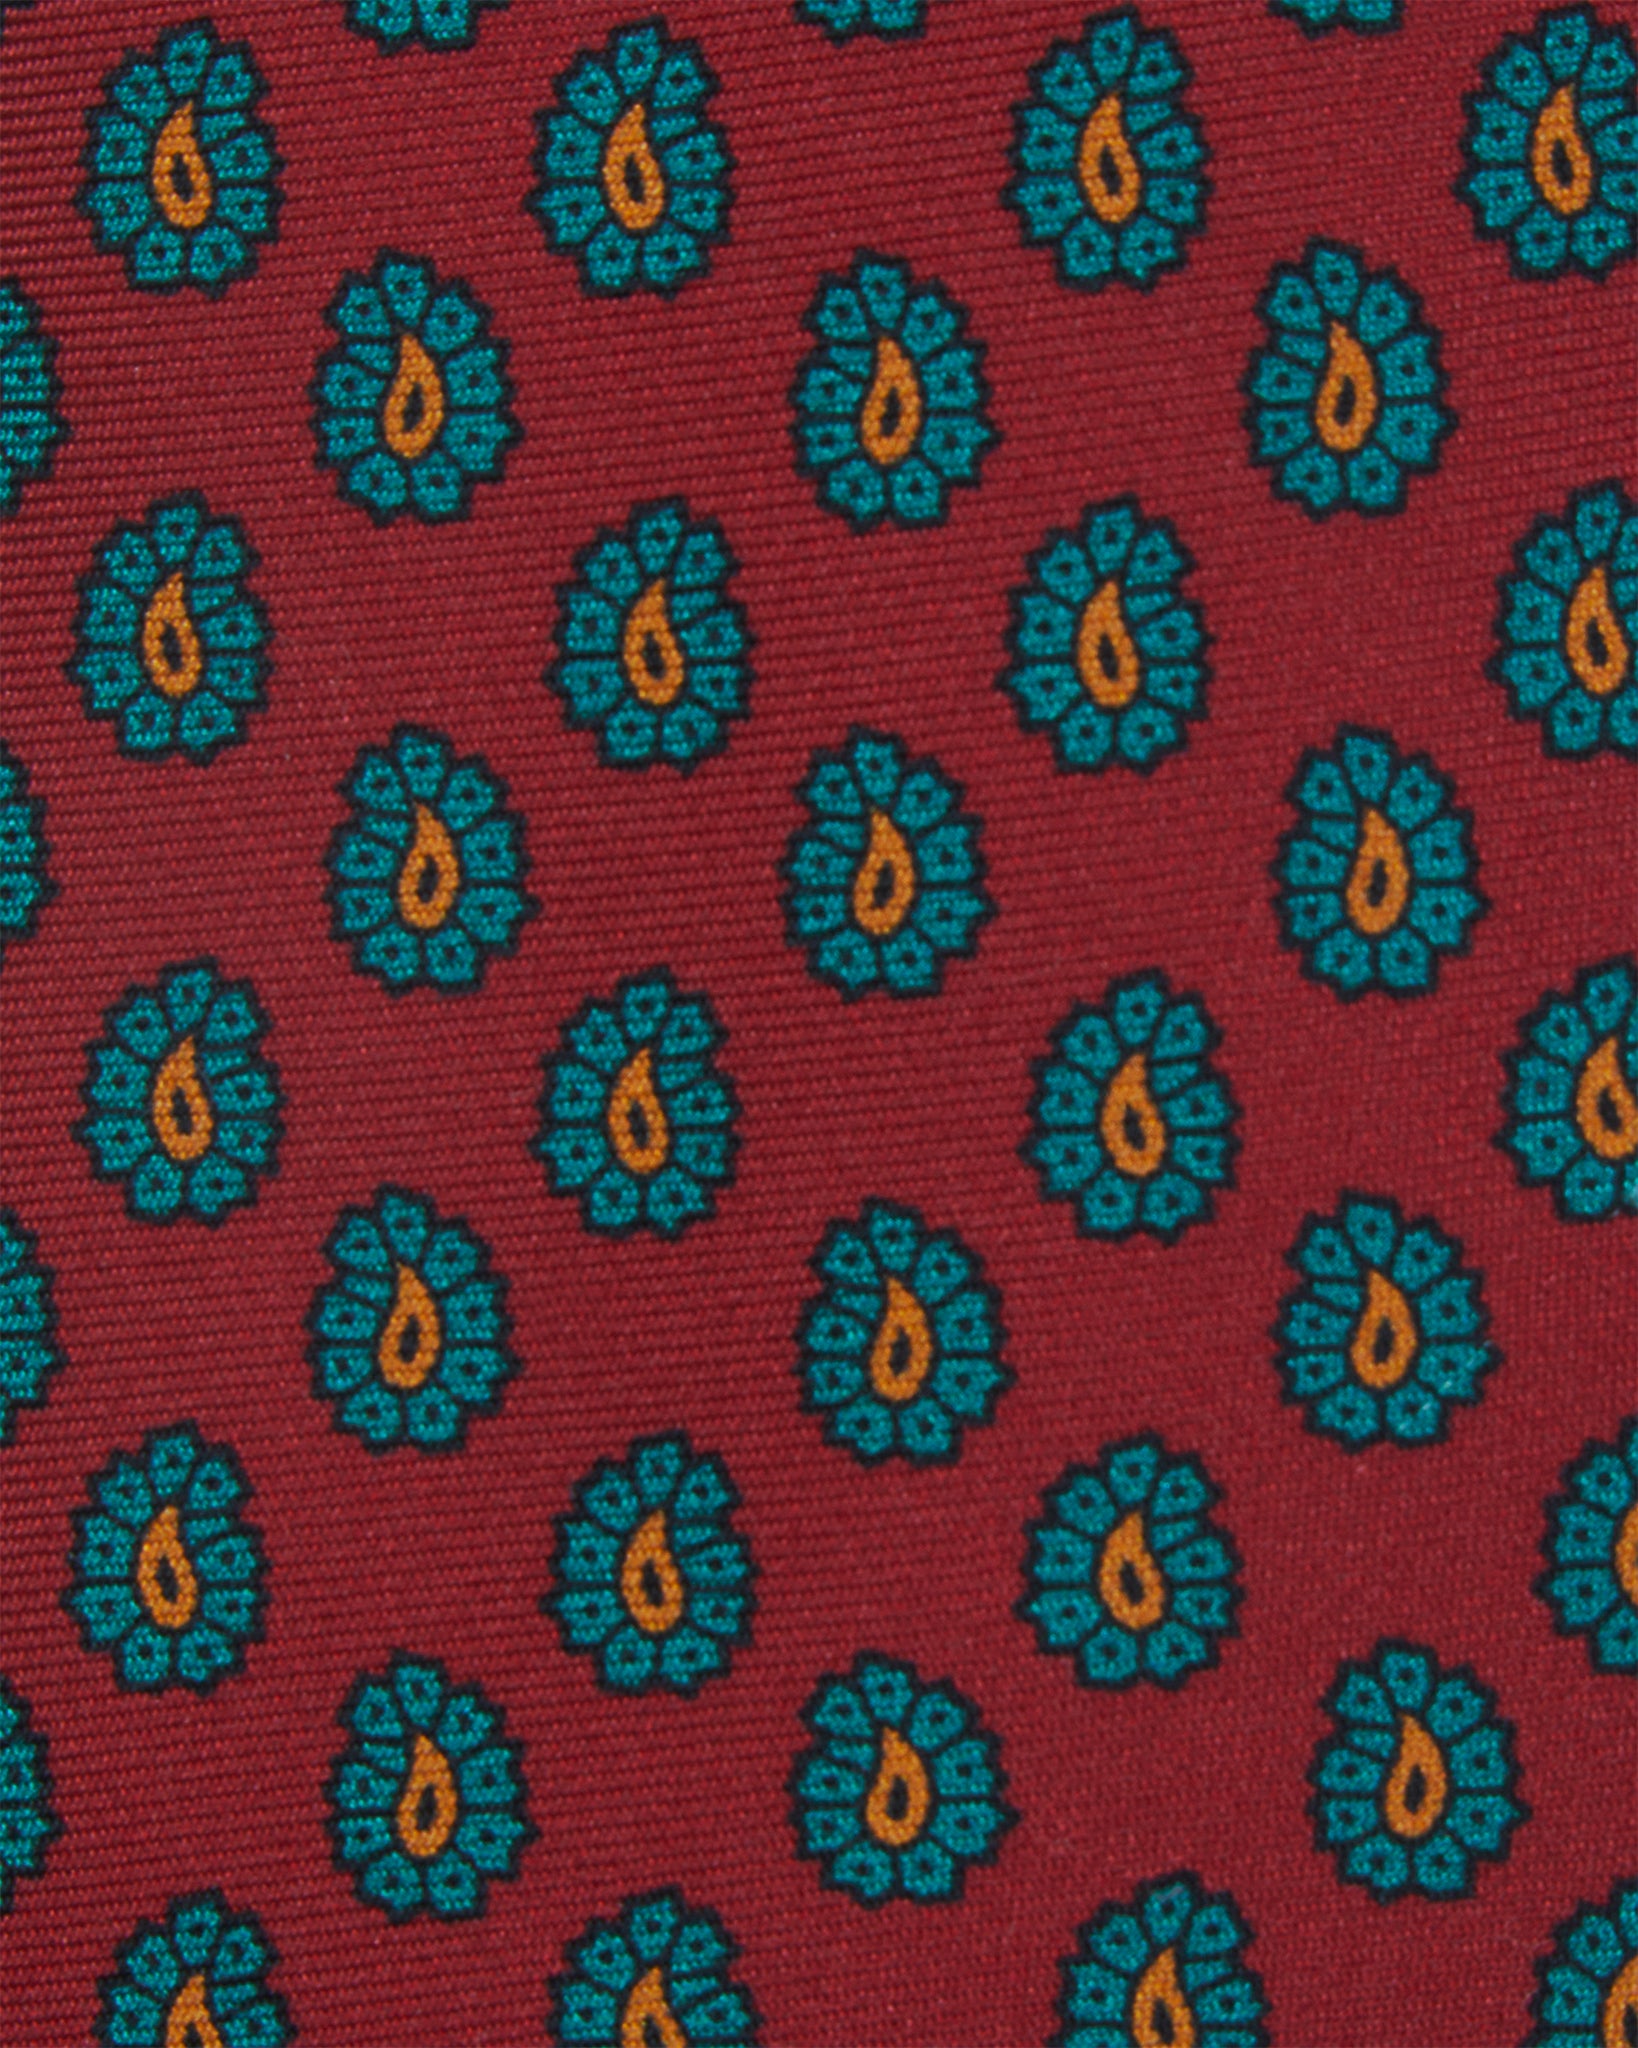 Silk Print Tie in Red/Emerald/Gold Paisley